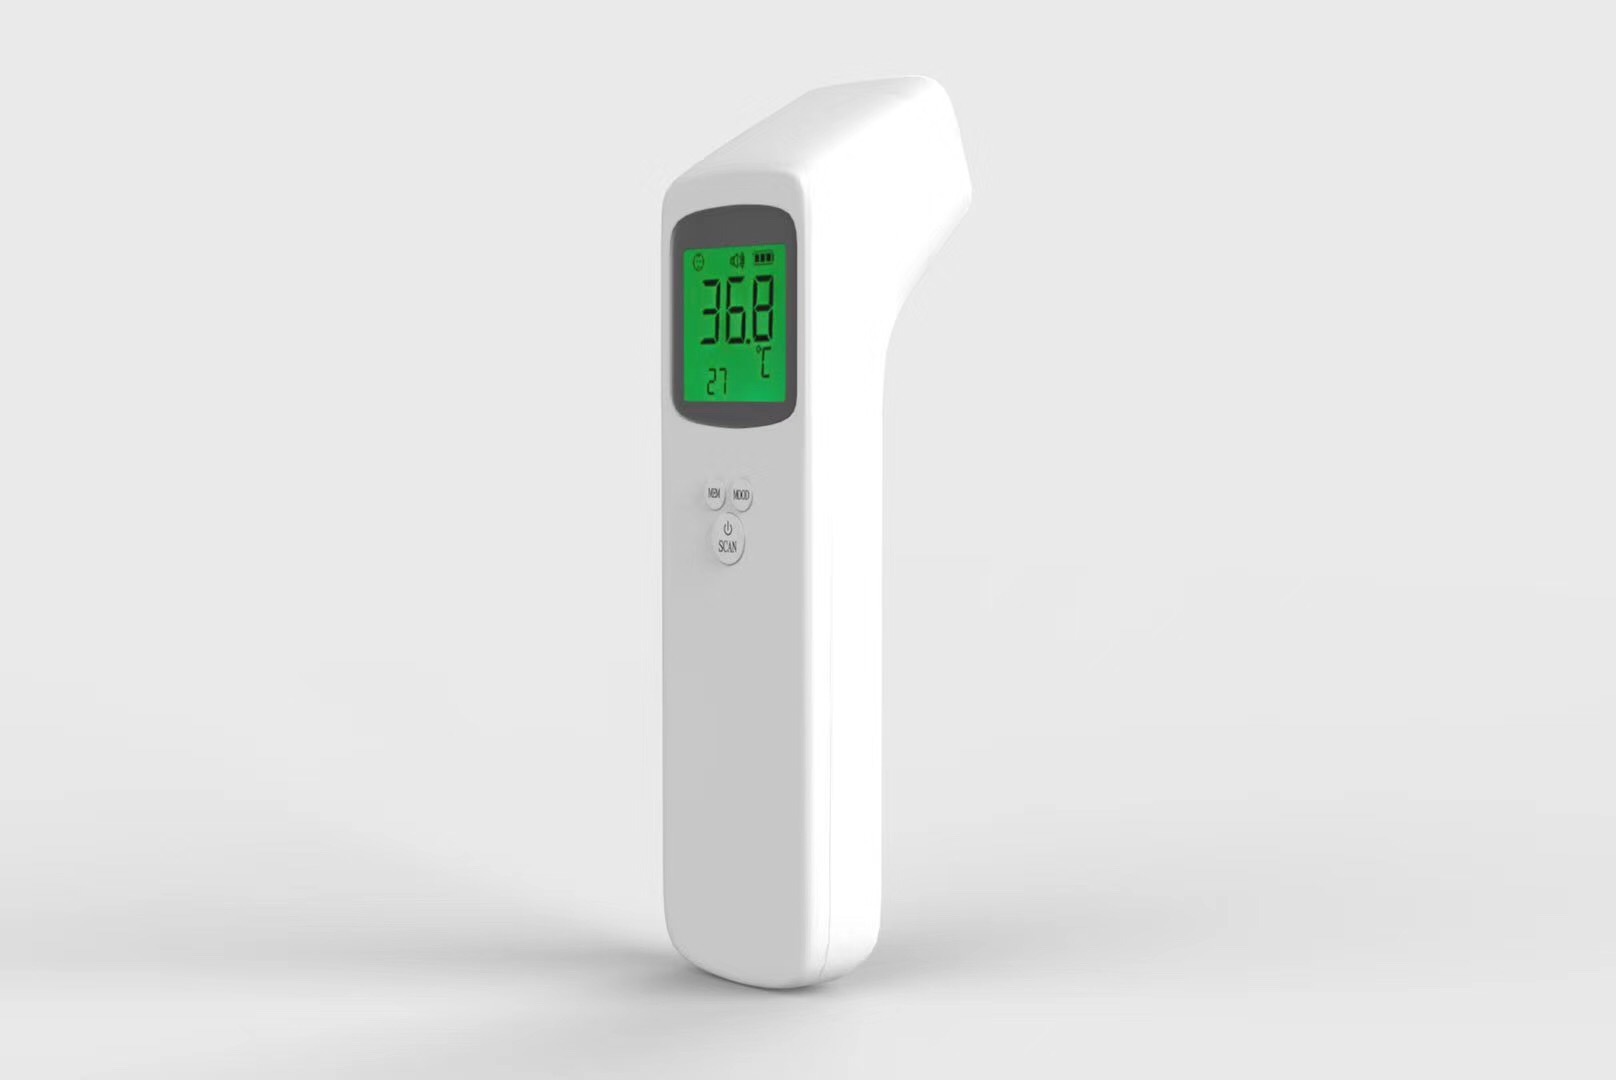 Our company successfully developed a non-contact infrared thermometer